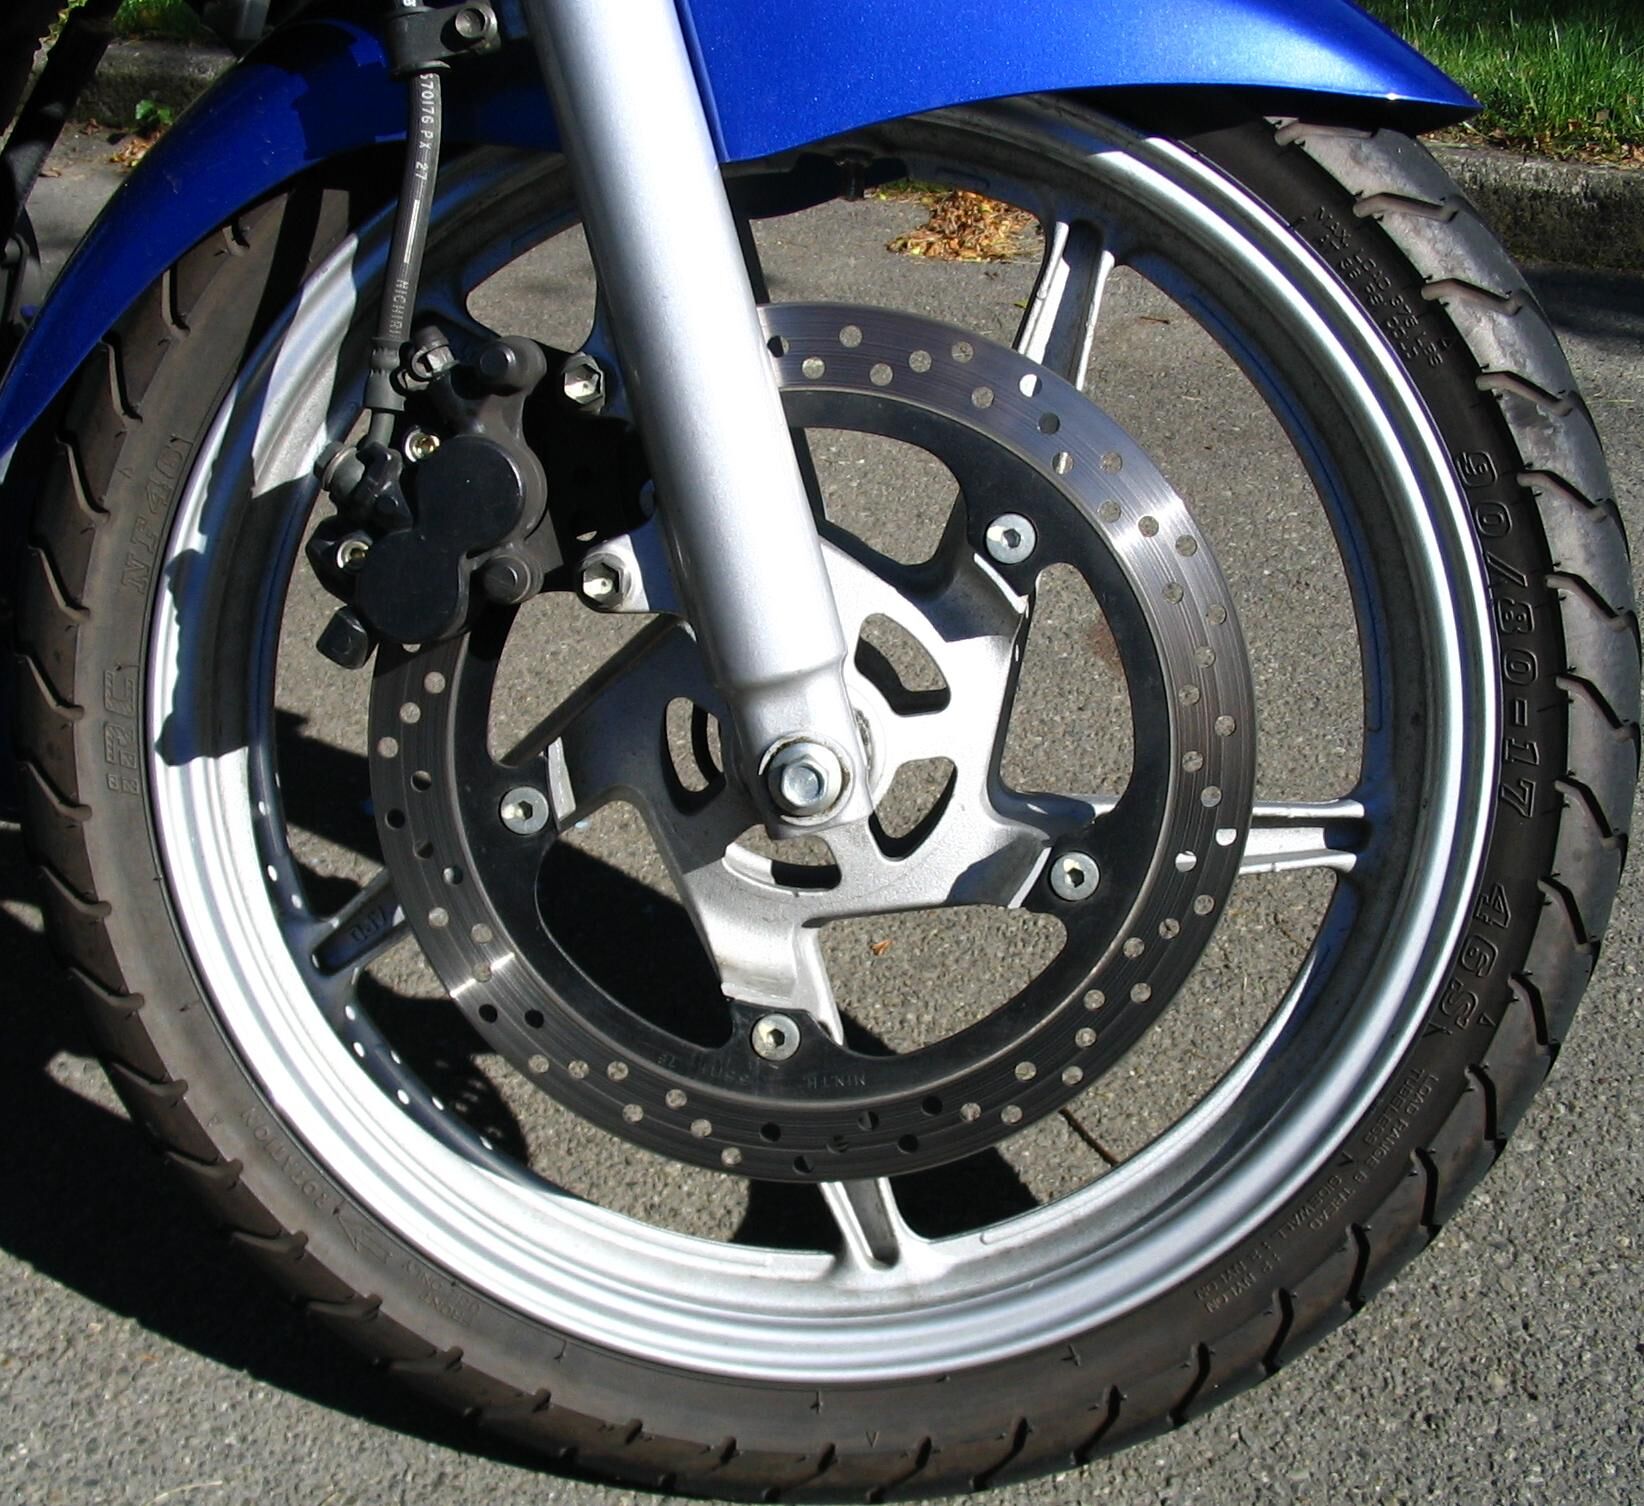 https://static.wikia.nocookie.net/motorrad/images/7/74/Disc_brake.jpg/revision/latest/scale-to-width-down/1644?cb=20070315124912